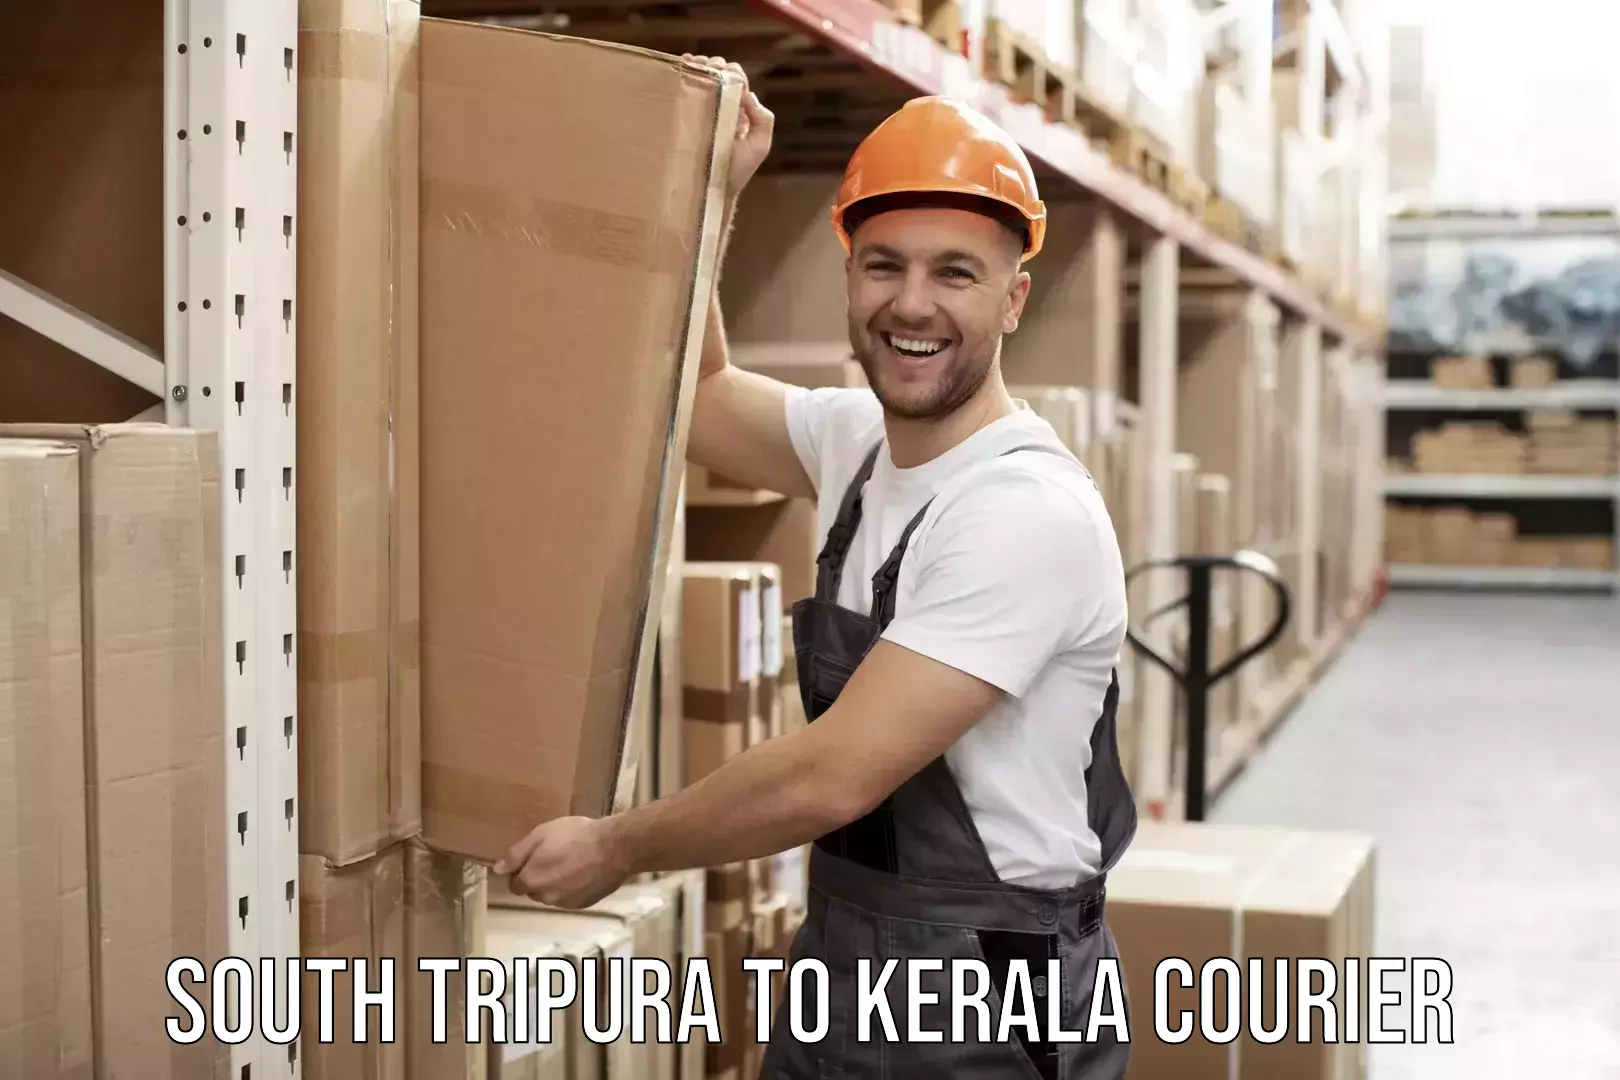 Trusted relocation experts South Tripura to Idukki